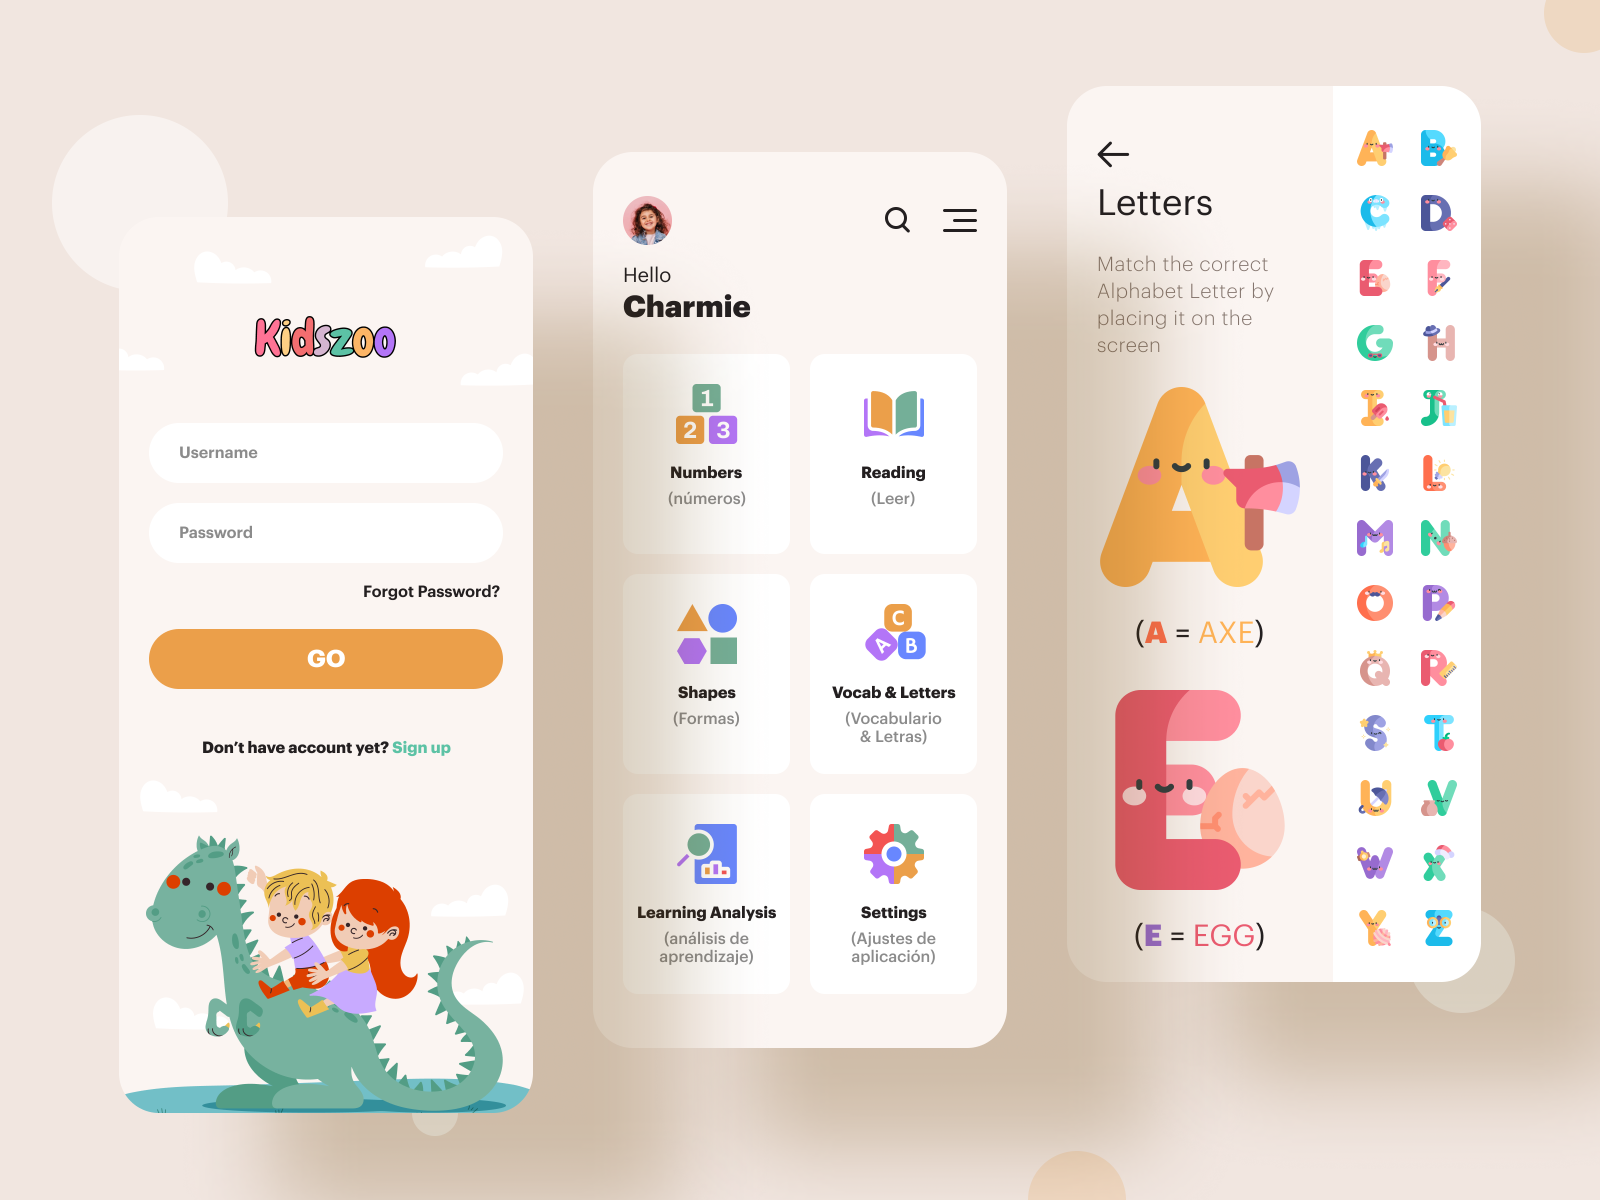 This app for language learning is aimed at babies